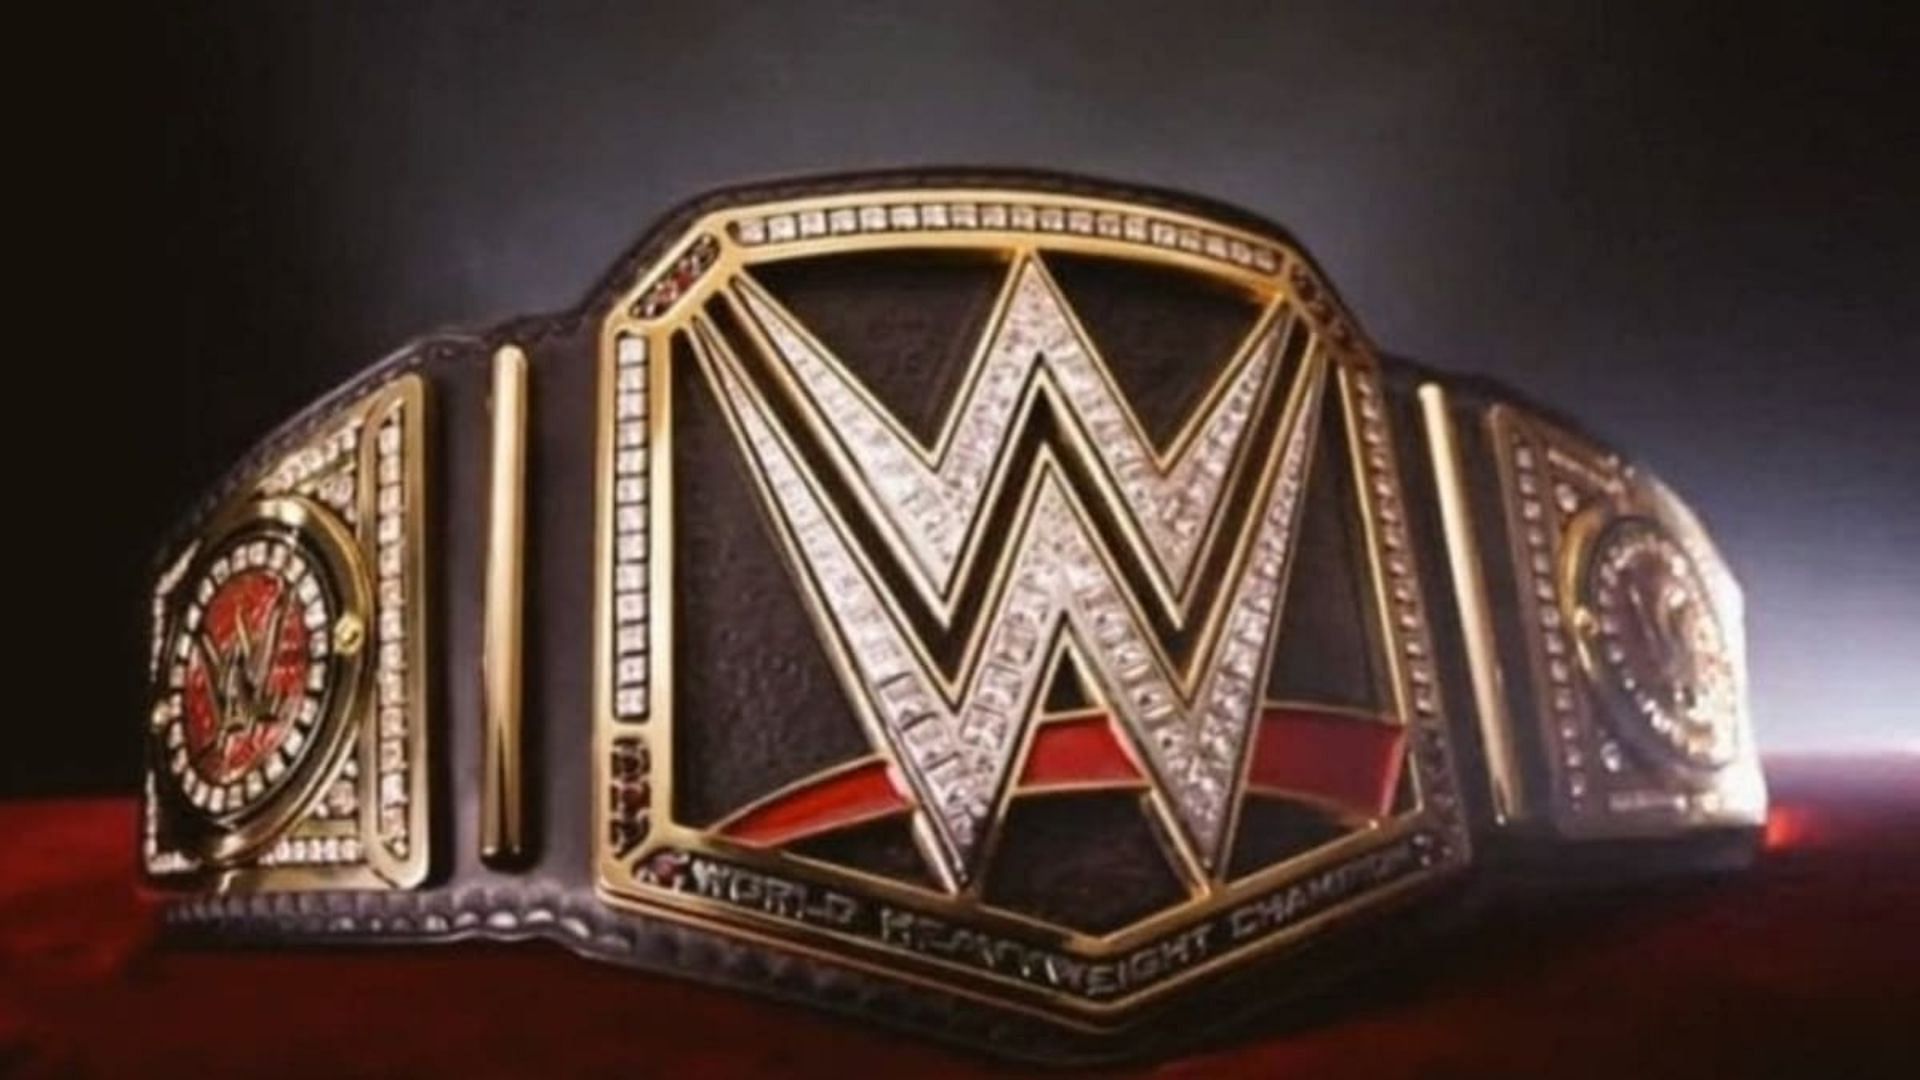 Over the years there have been 54 recognized WWE Champions!